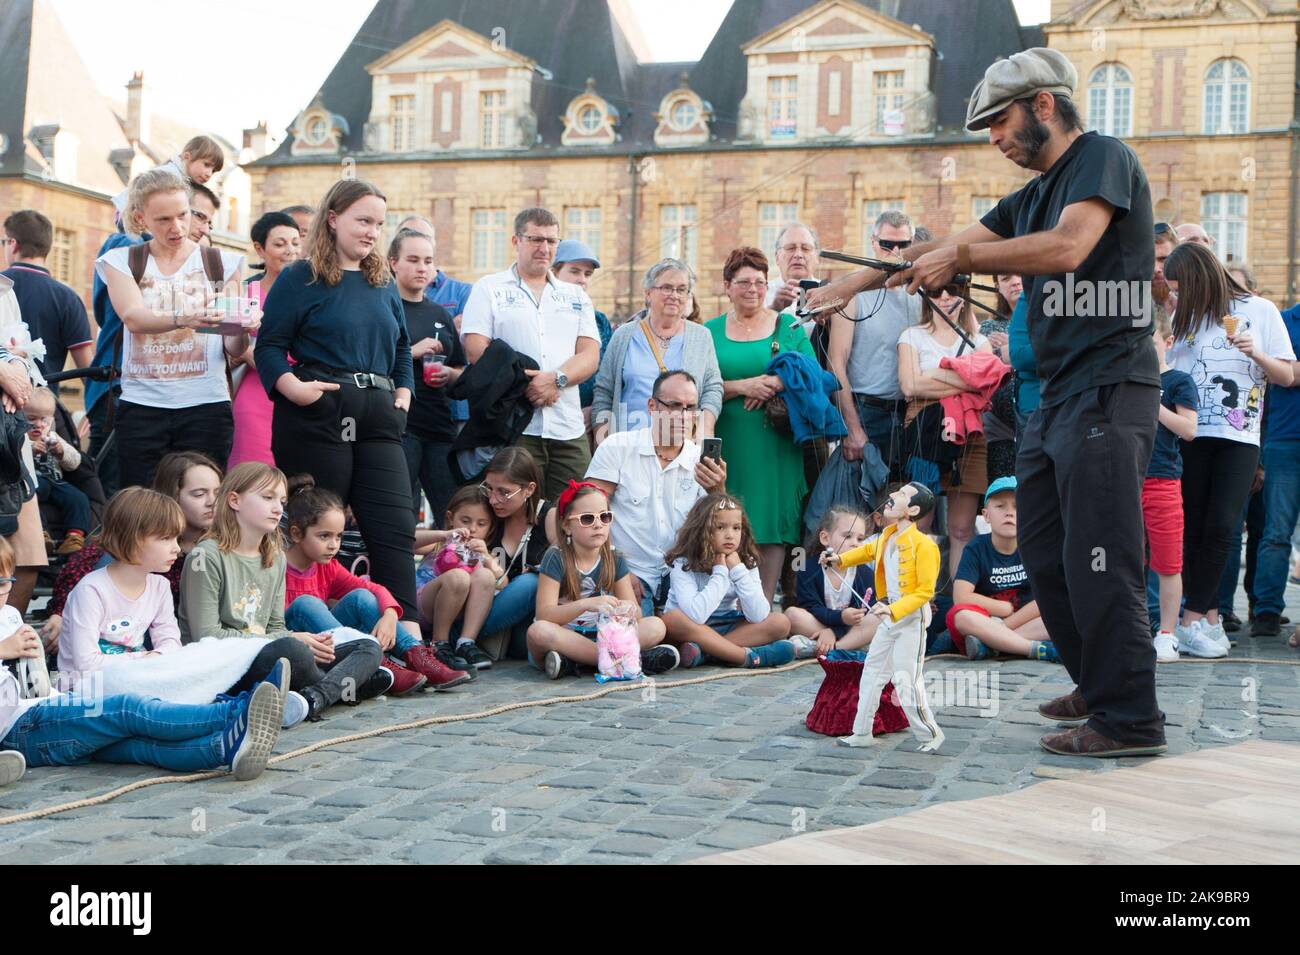 Marionette show in a street of the town of Charleville-Mezieres within the framework of the World Puppet Theatre Festival on Saturday, September 21, 2 Stock Photo